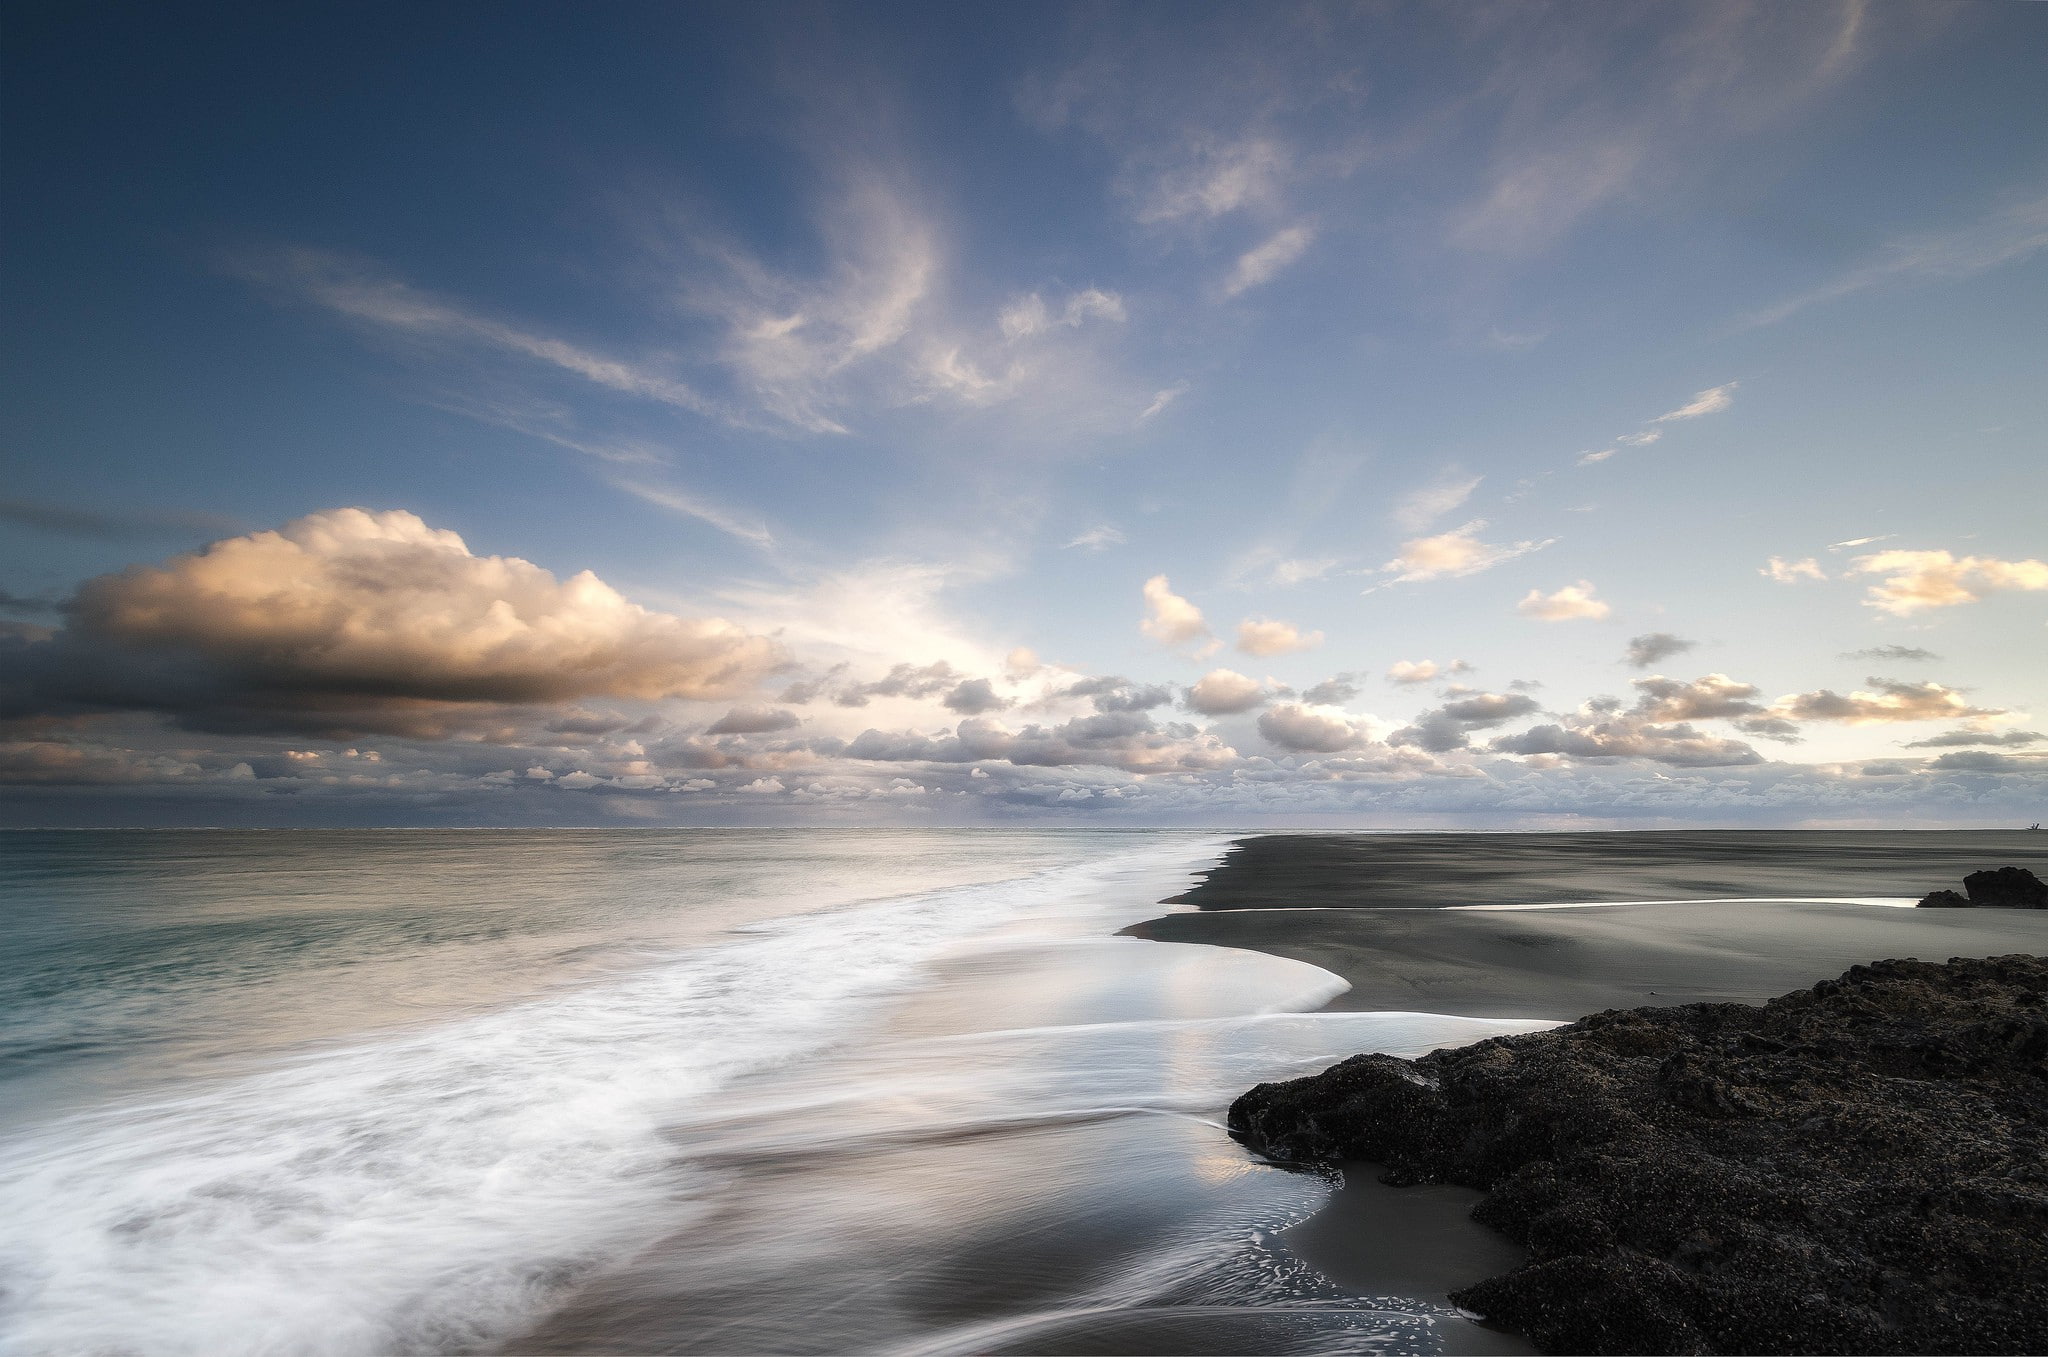 Evening with sea, clouds and sea photograph, coast, sand